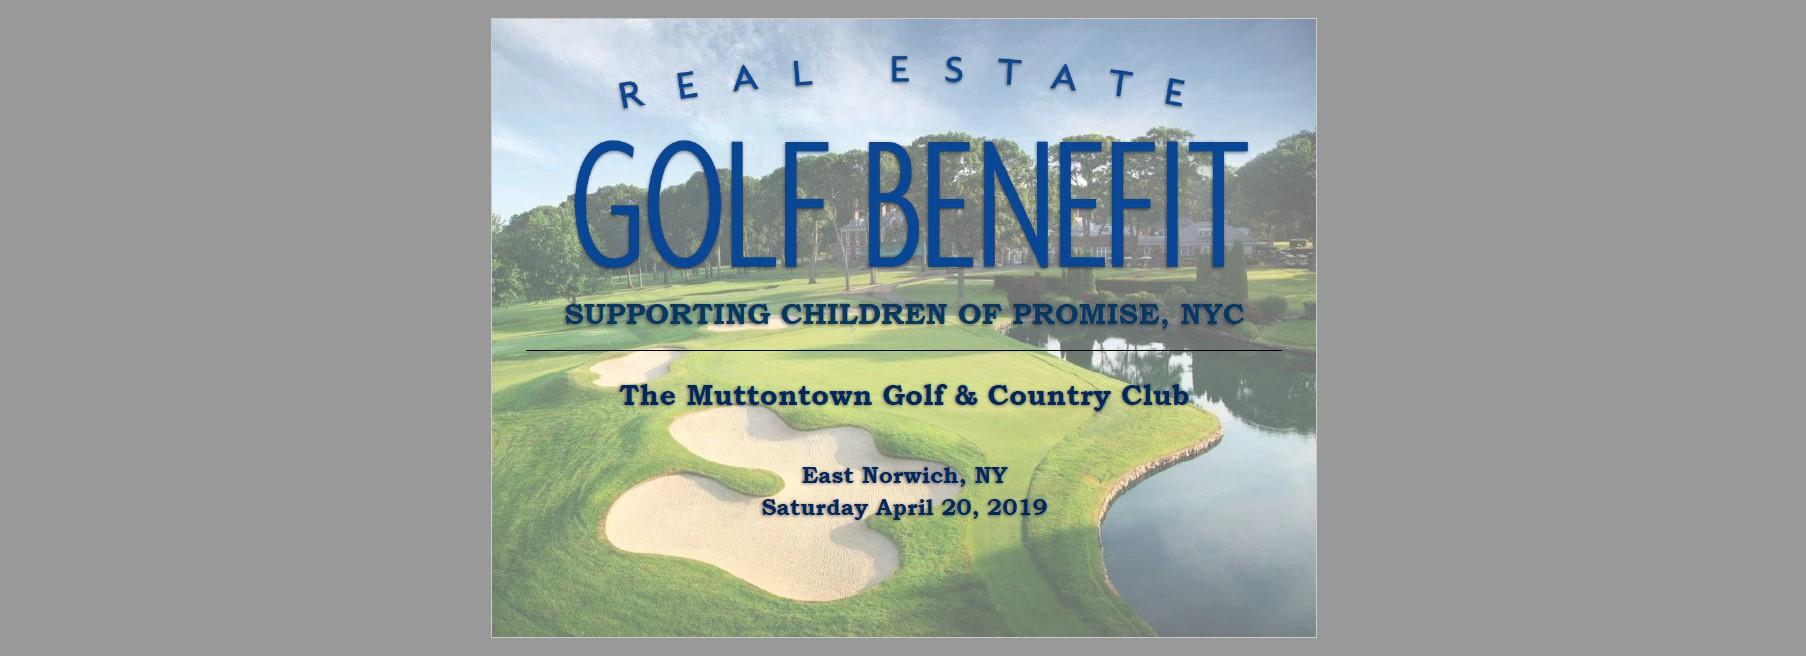 Real Estate Golf Benefit for Children of Promise NYC